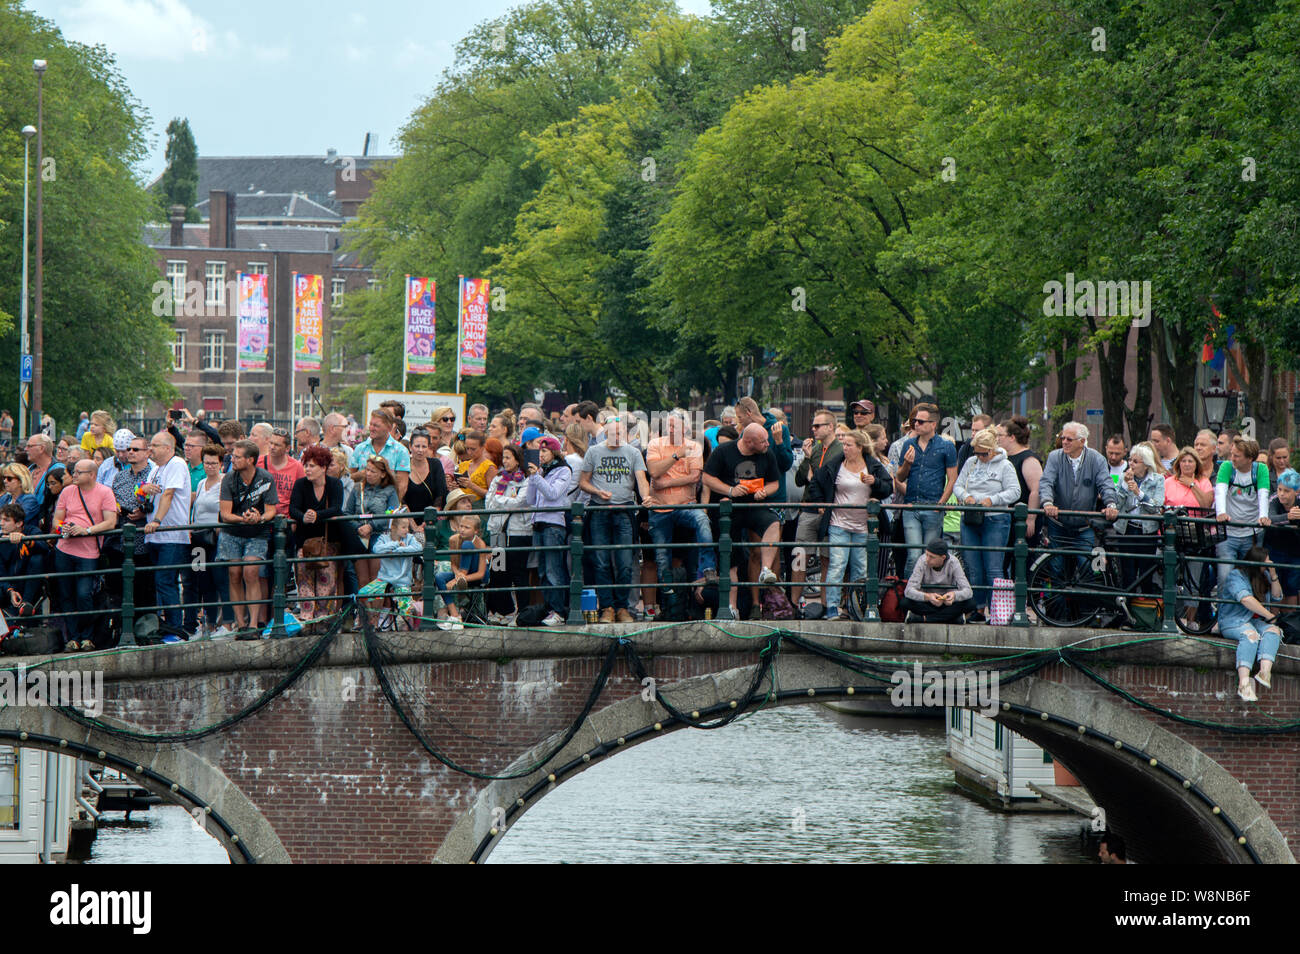 Crowd Along The Amstel River During The Gay Pride Amsterdam The Netherlands 2019Crowd Along The Amstel River During The Gay Pride Amsterdam The Nether Stock Photo